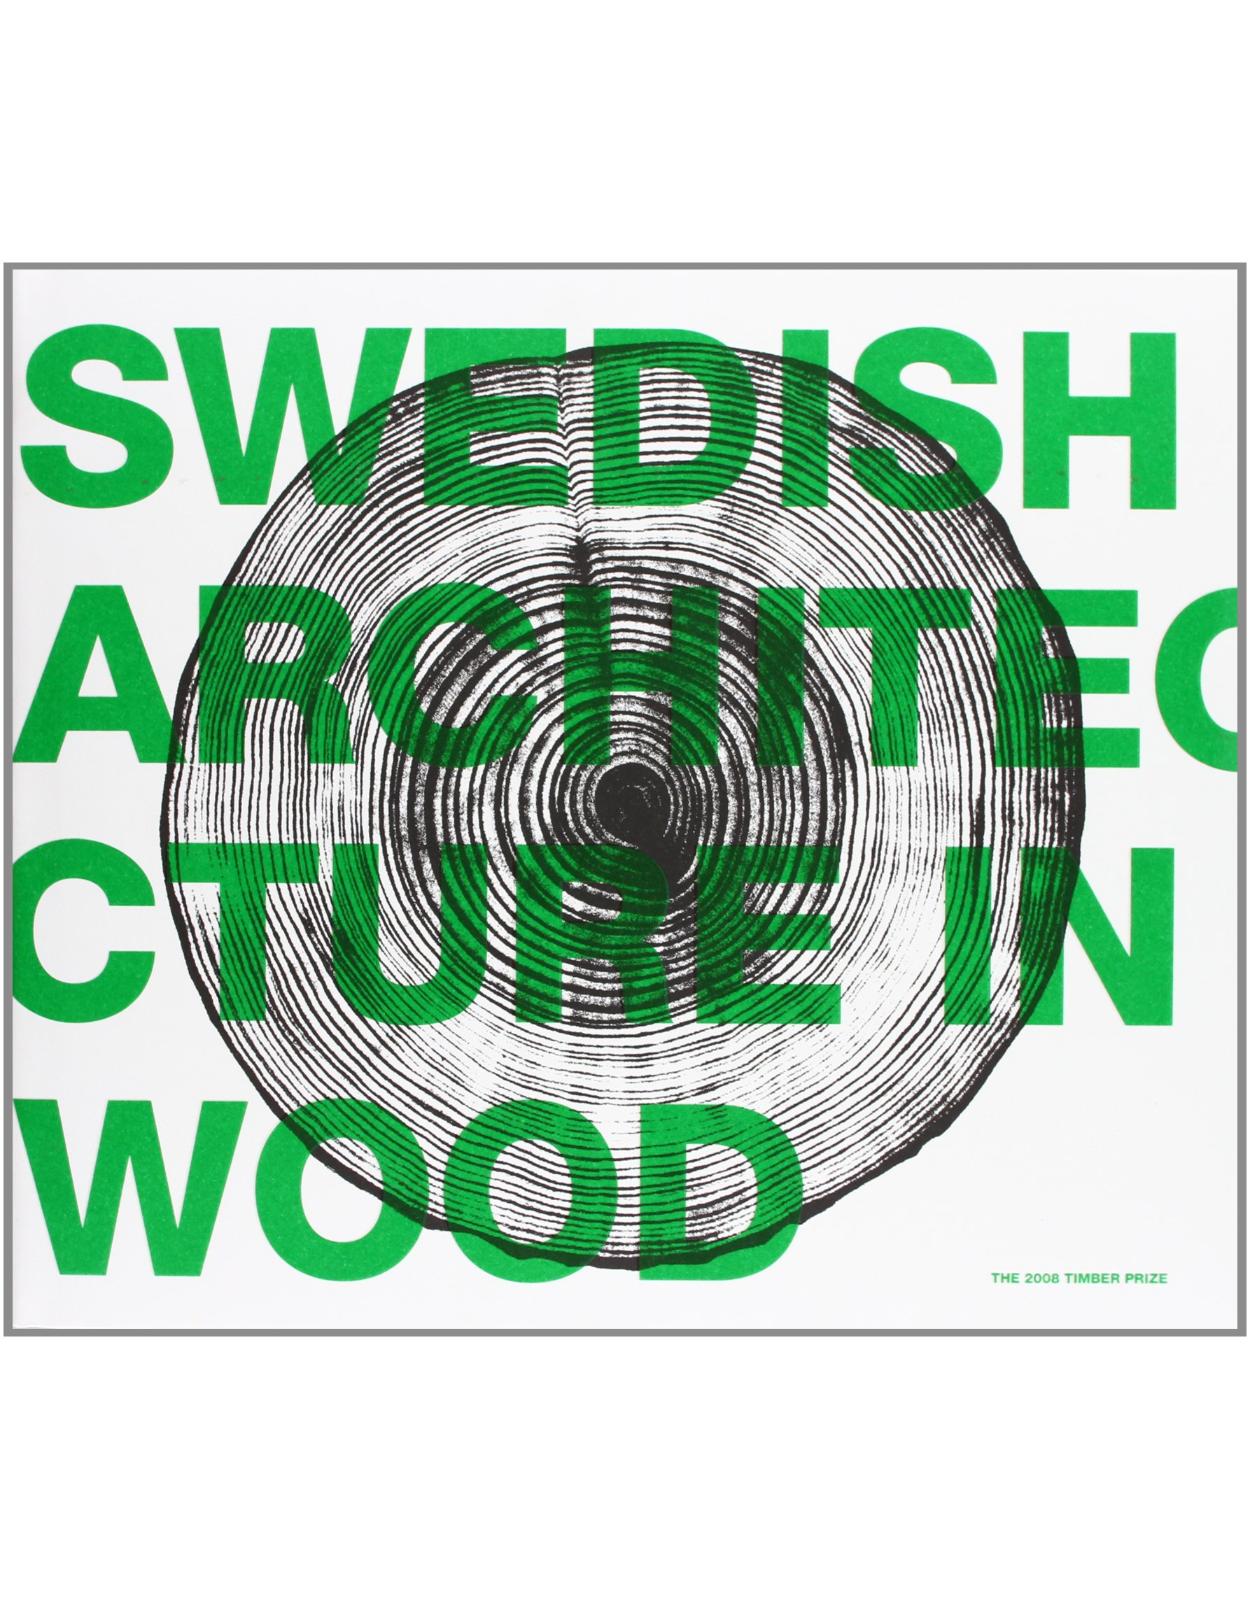 Swedish Architecture in Wood - The Timber Prize 2008